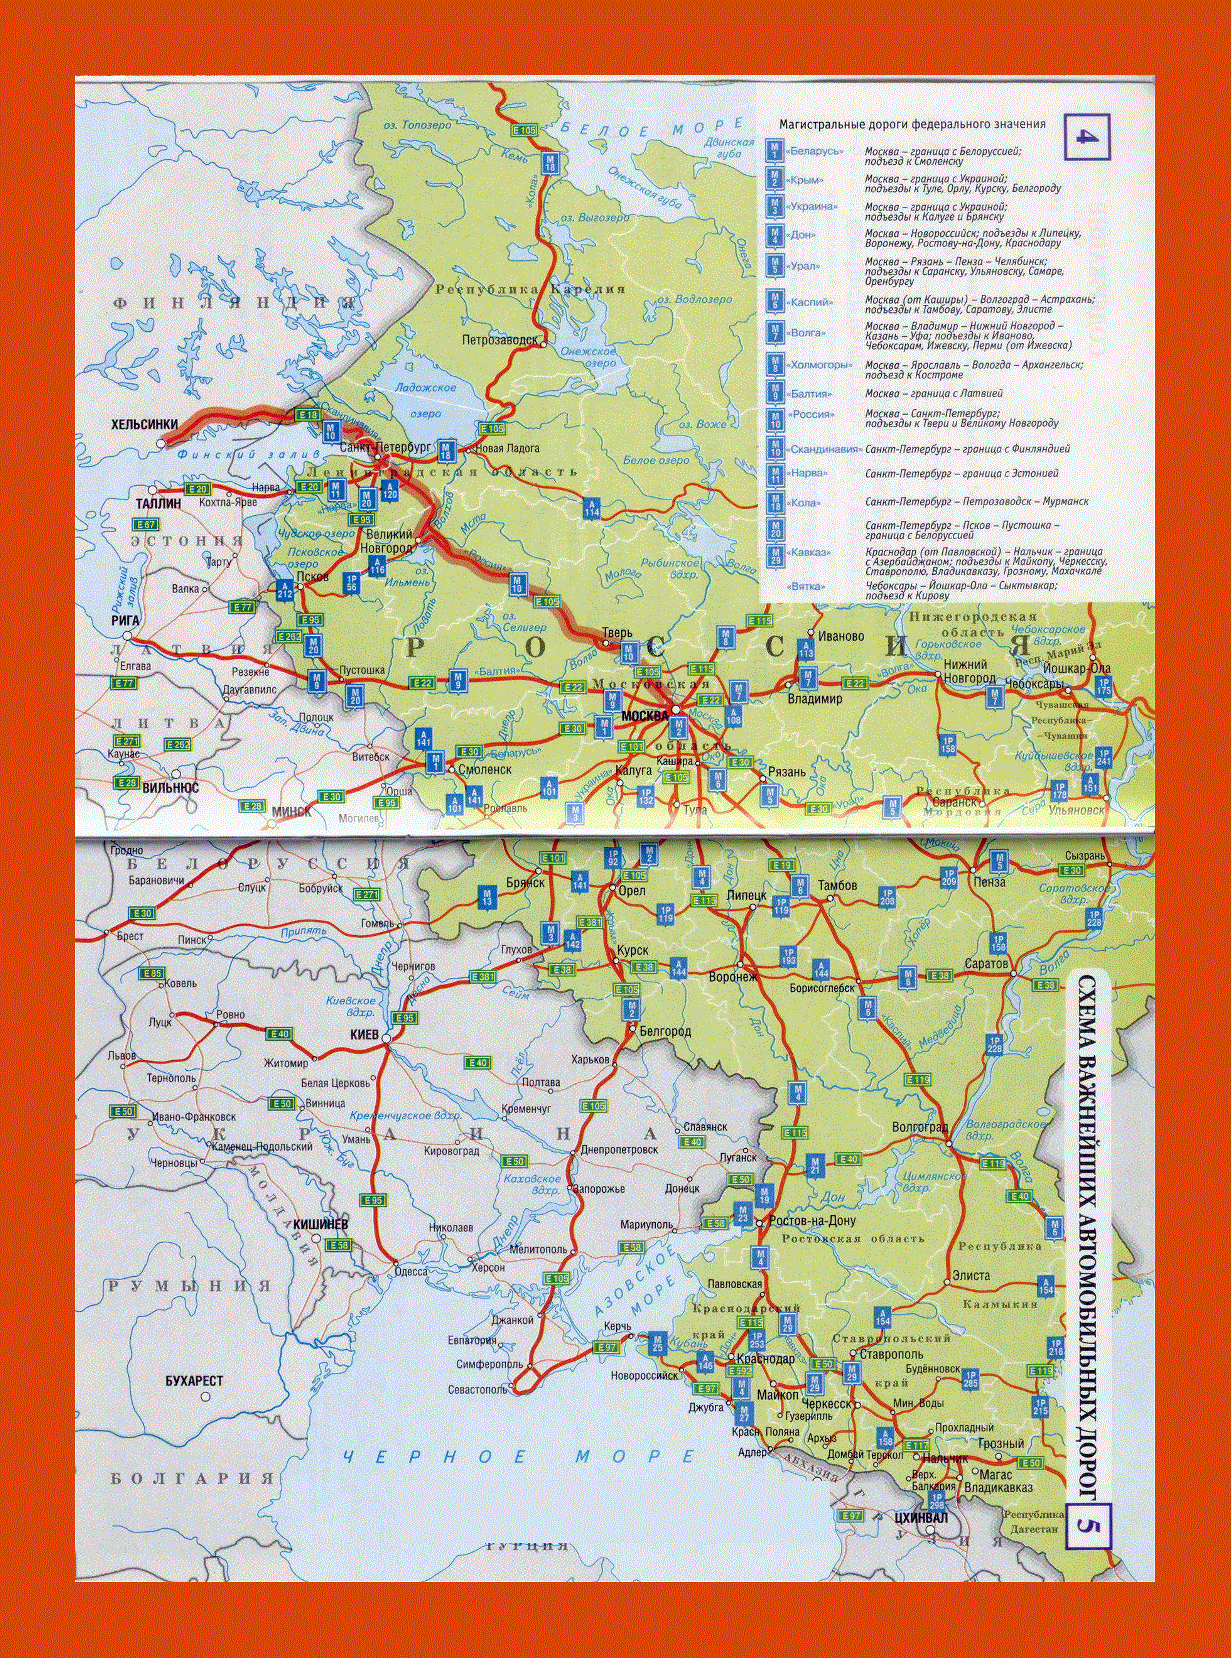 Road map of the European Part of Russia in russian